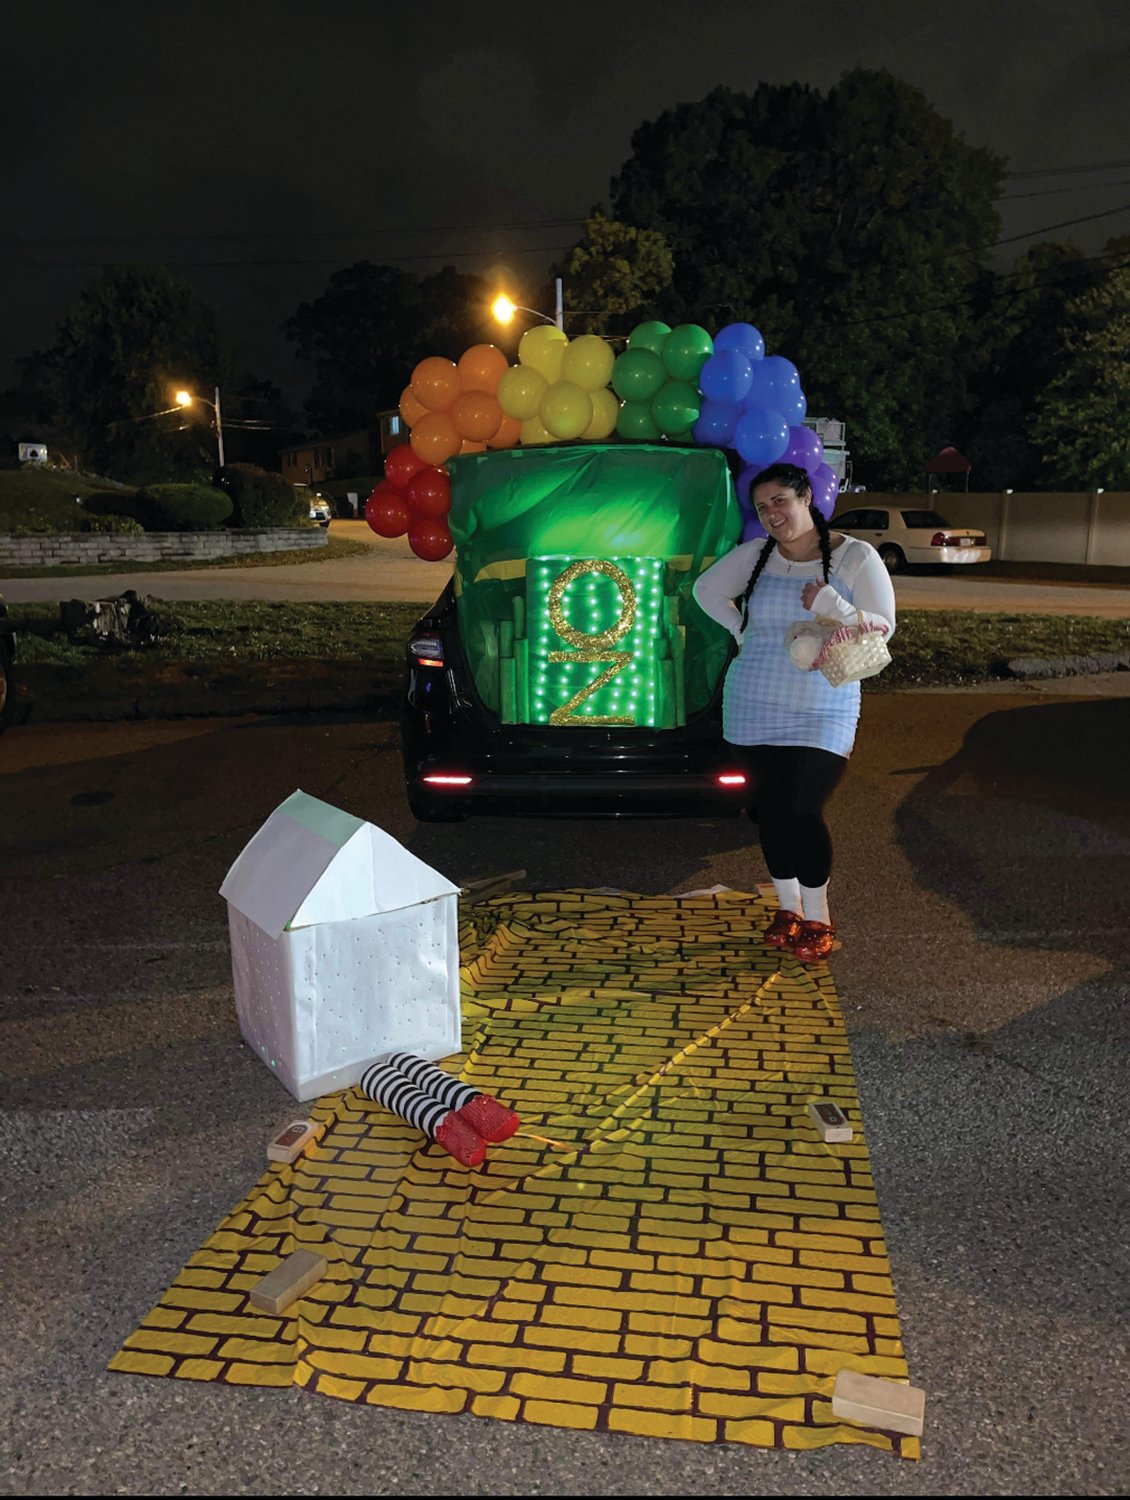 TRUNK OR TREAT: Scribbles Academy in Johnston, owned by Sherri Charron, held a Trunk or Treat night Thursday. The preschool, at 678 Killingly St., in Johnston, welcomed families to the outdoor Halloween event. 